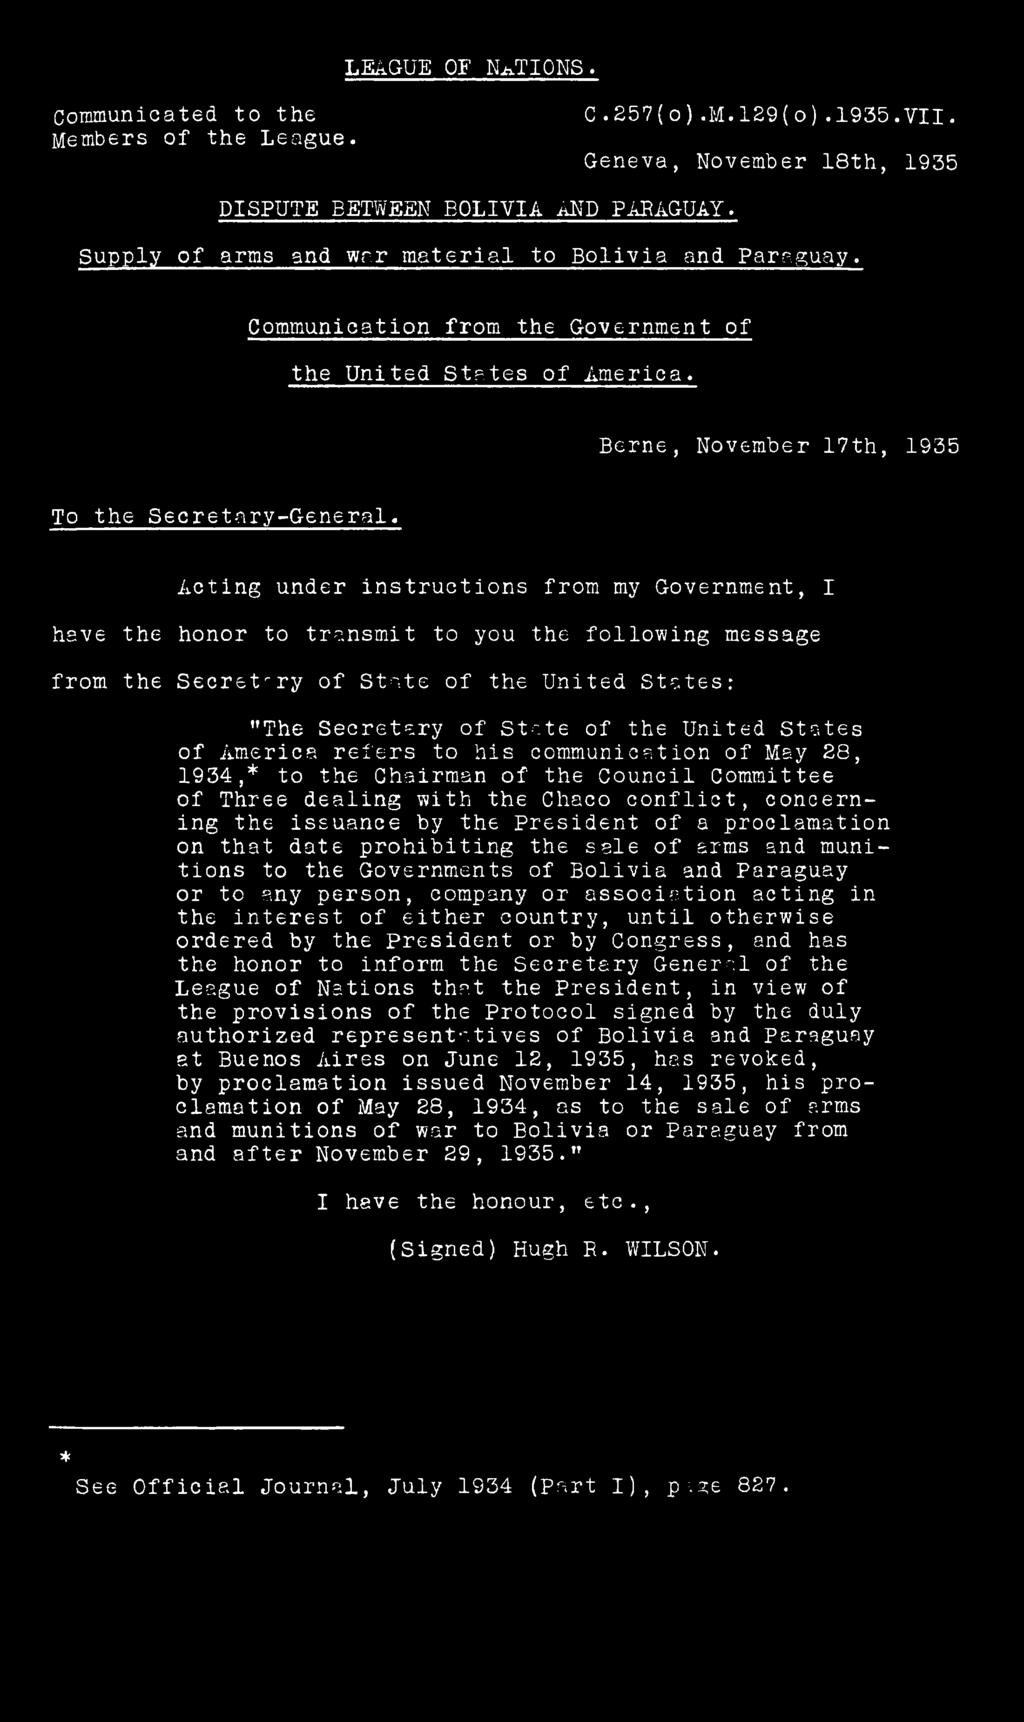 Stcte of the United States of America refers to his communication of May 28, 1934,* to the Chairman of the Council Committee of Three dealing with the Chaco conflict, concerning the issuance by the